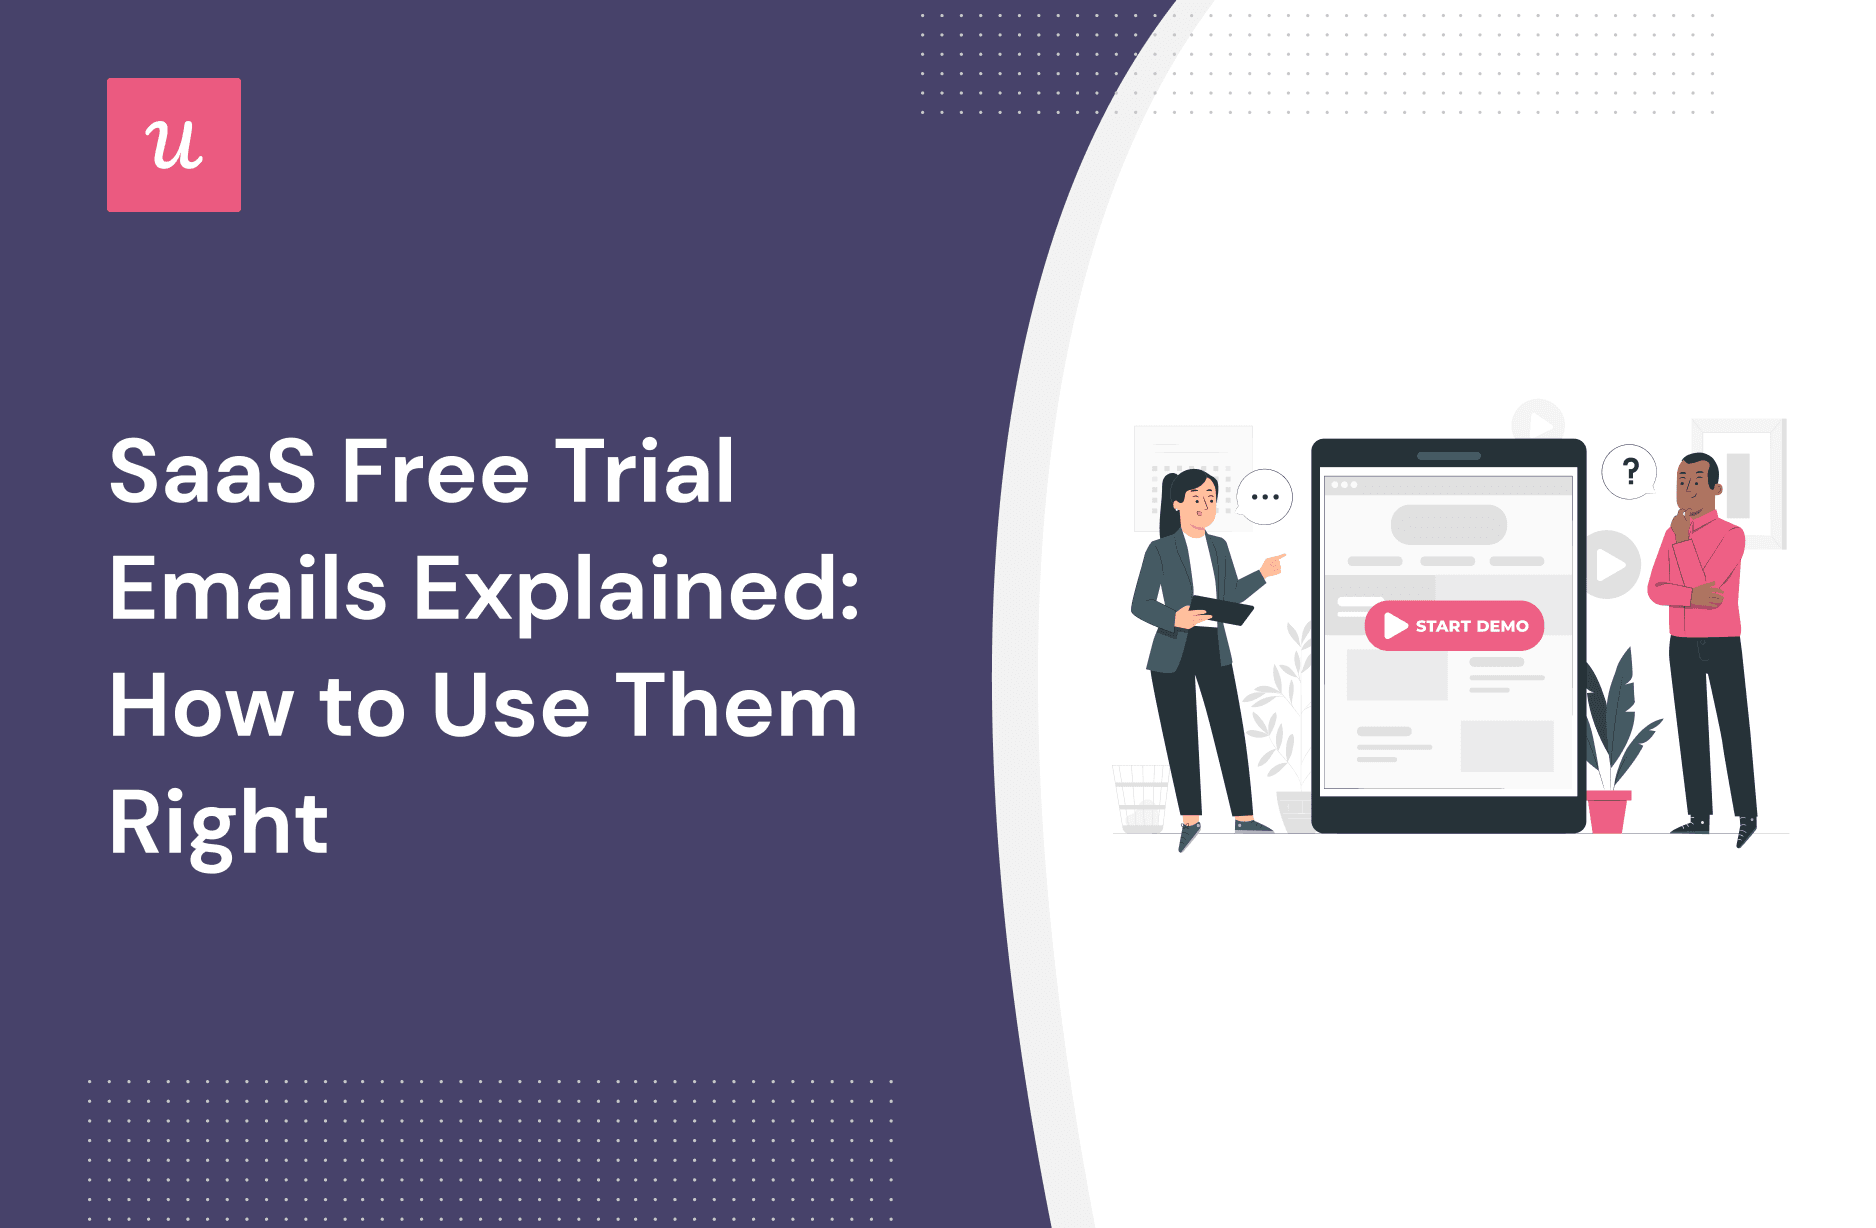 SaaS Free Trial Emails Explained: How to Use Them Right cover